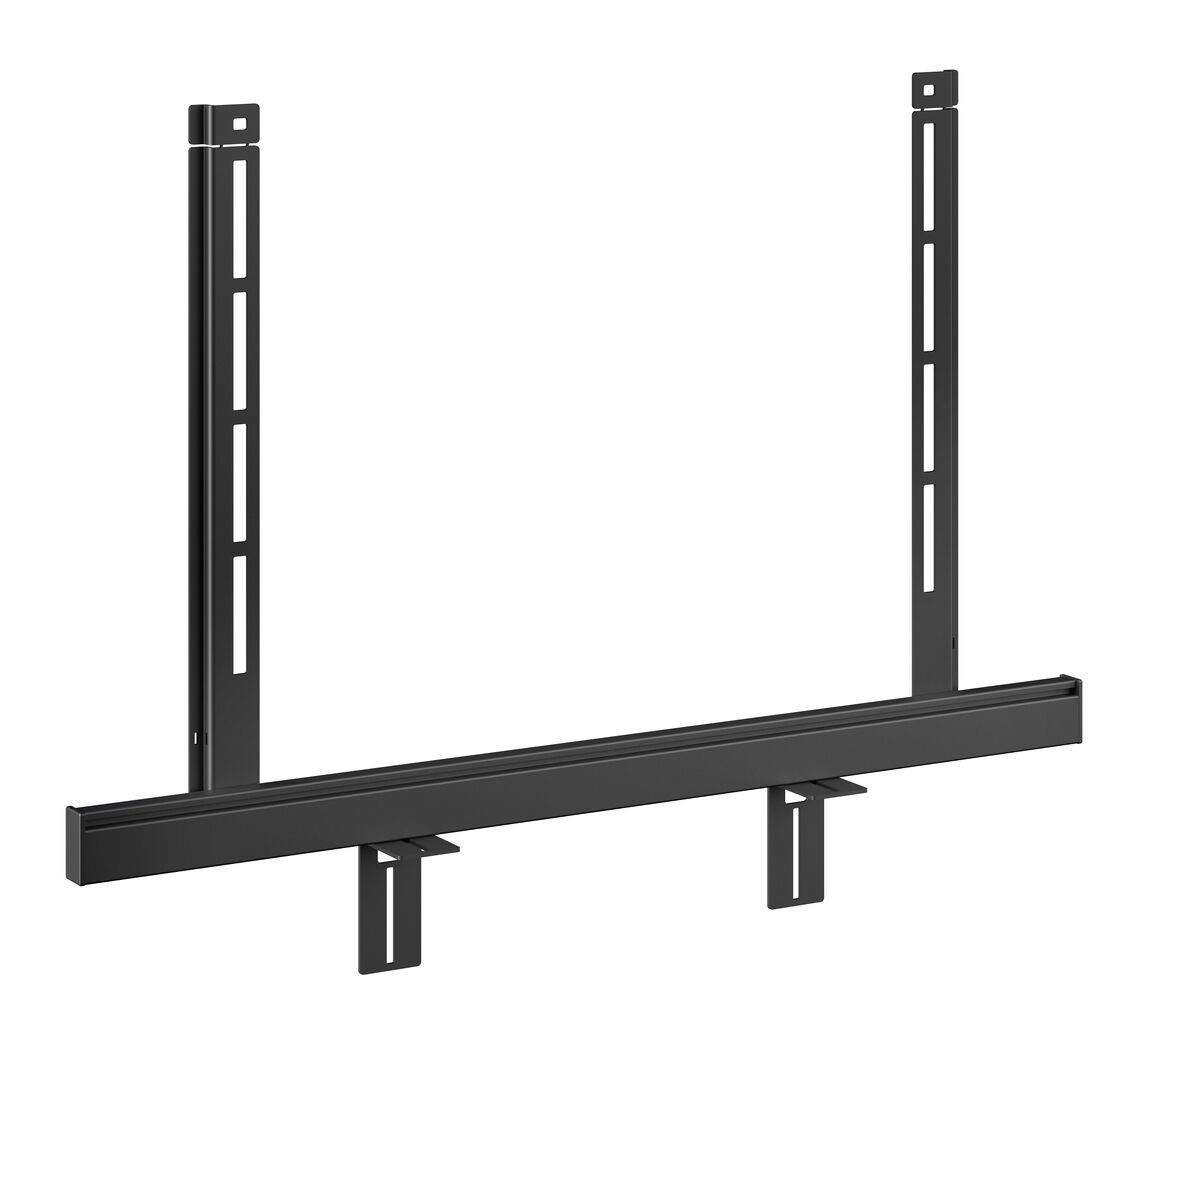 Vogel's RISE A121 Sound Bar Mount for RISE Motorized Display Lifts (black) Application